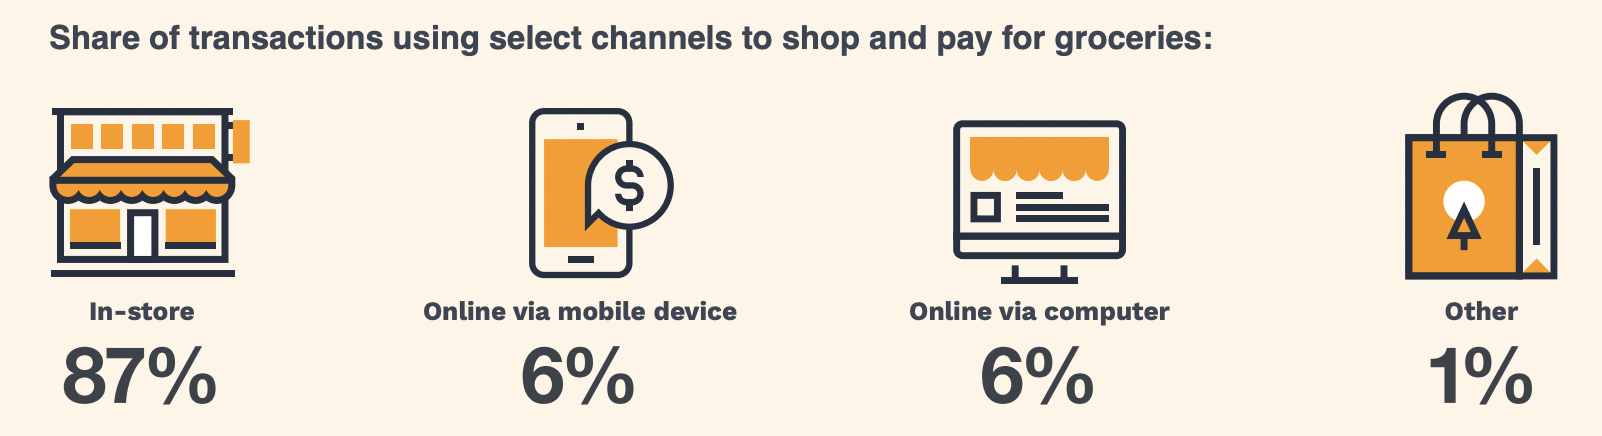 Share of transactions using select channels to shop and pay for groceries